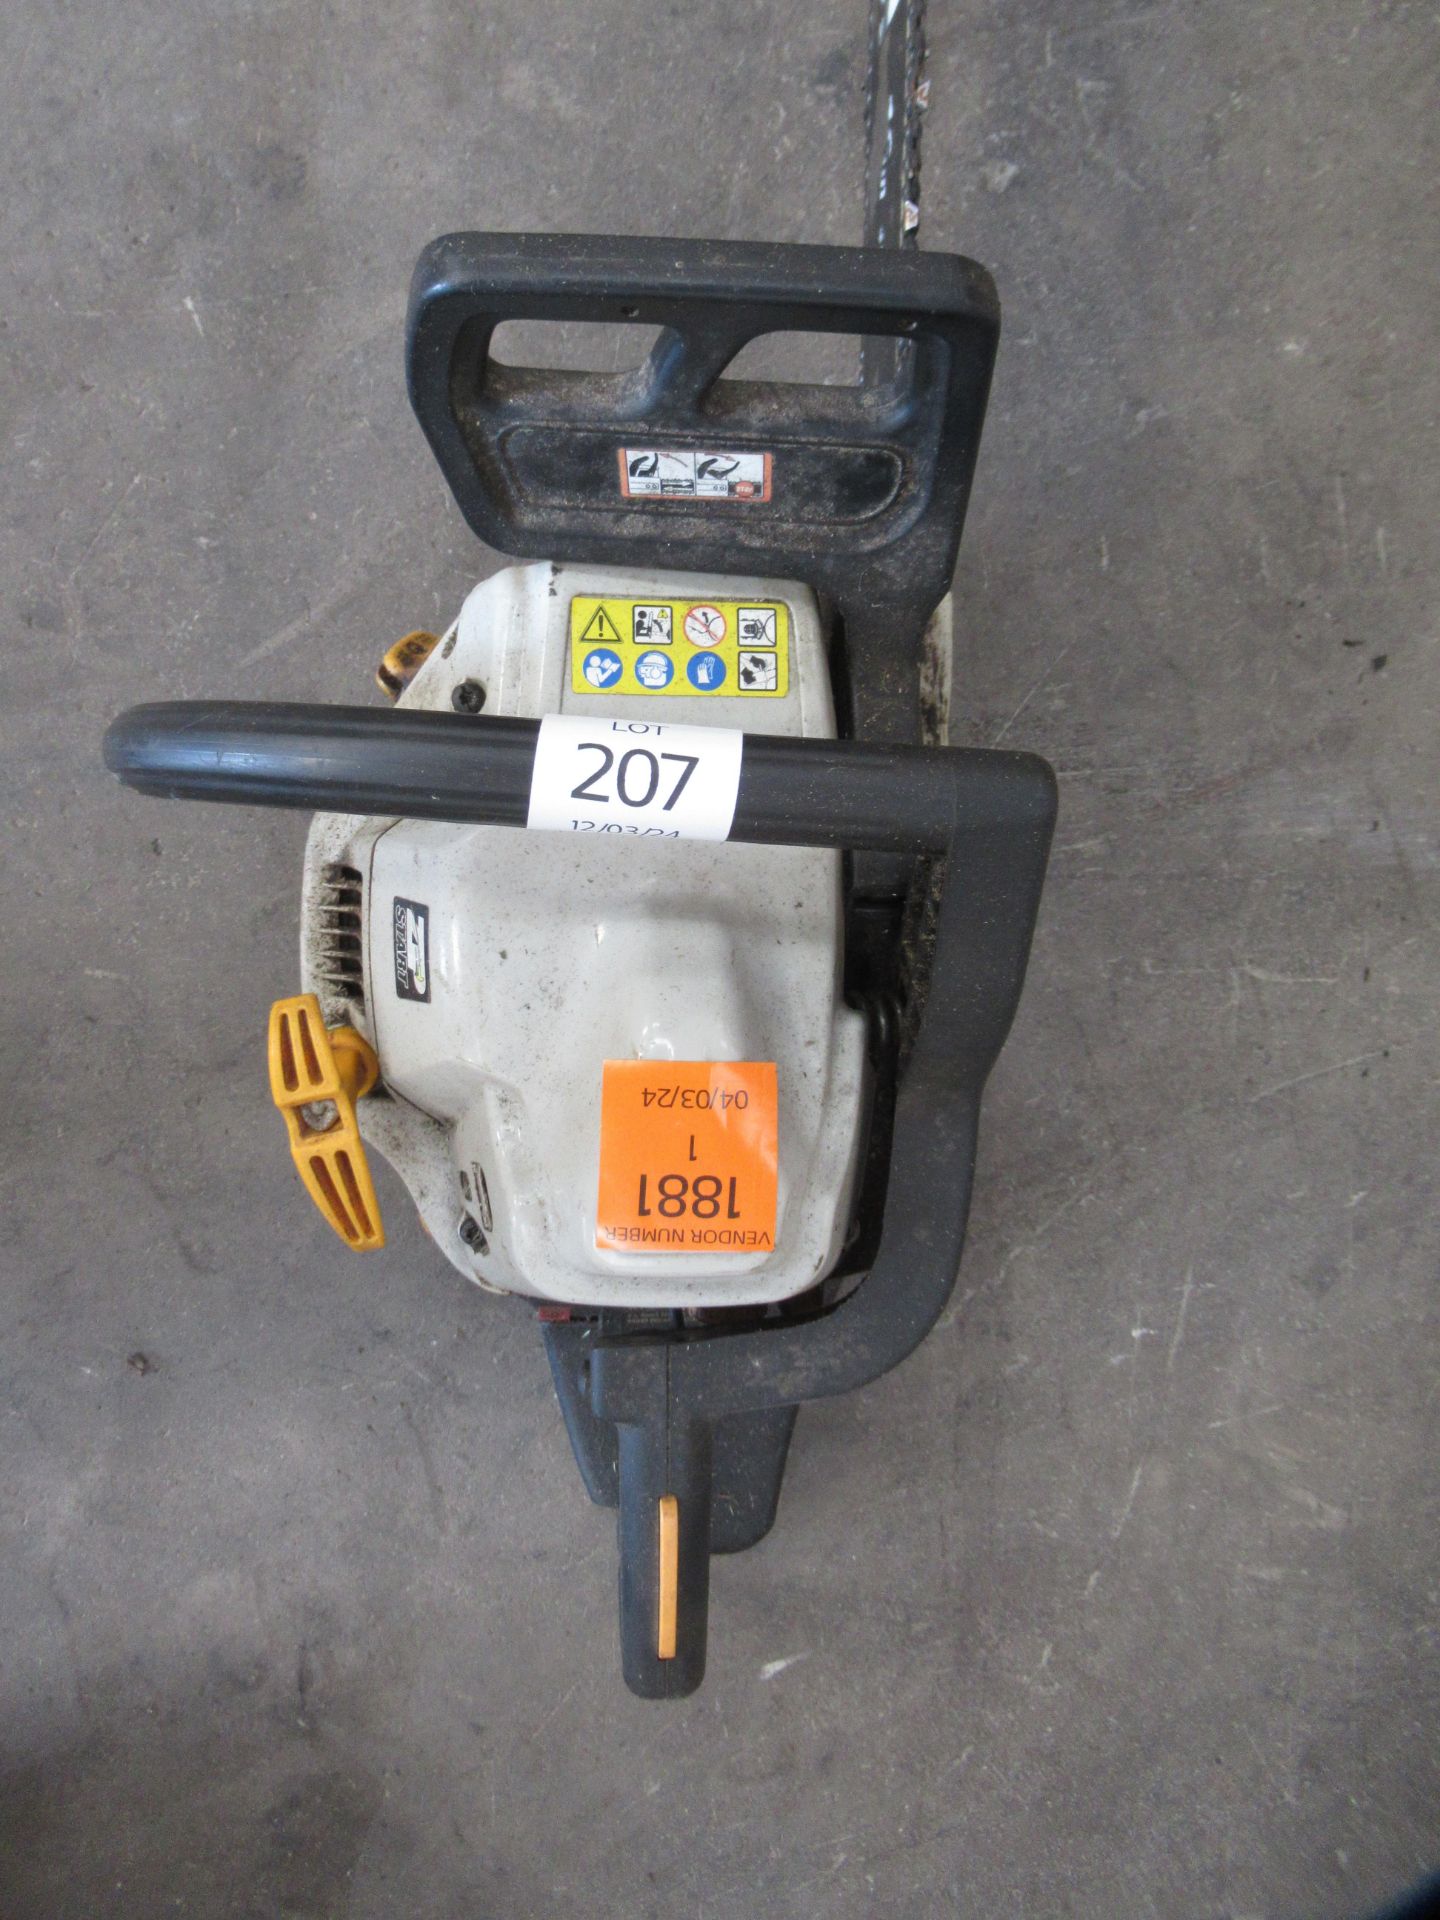 A Ryobi Chainsaw - non-runner - Image 2 of 3